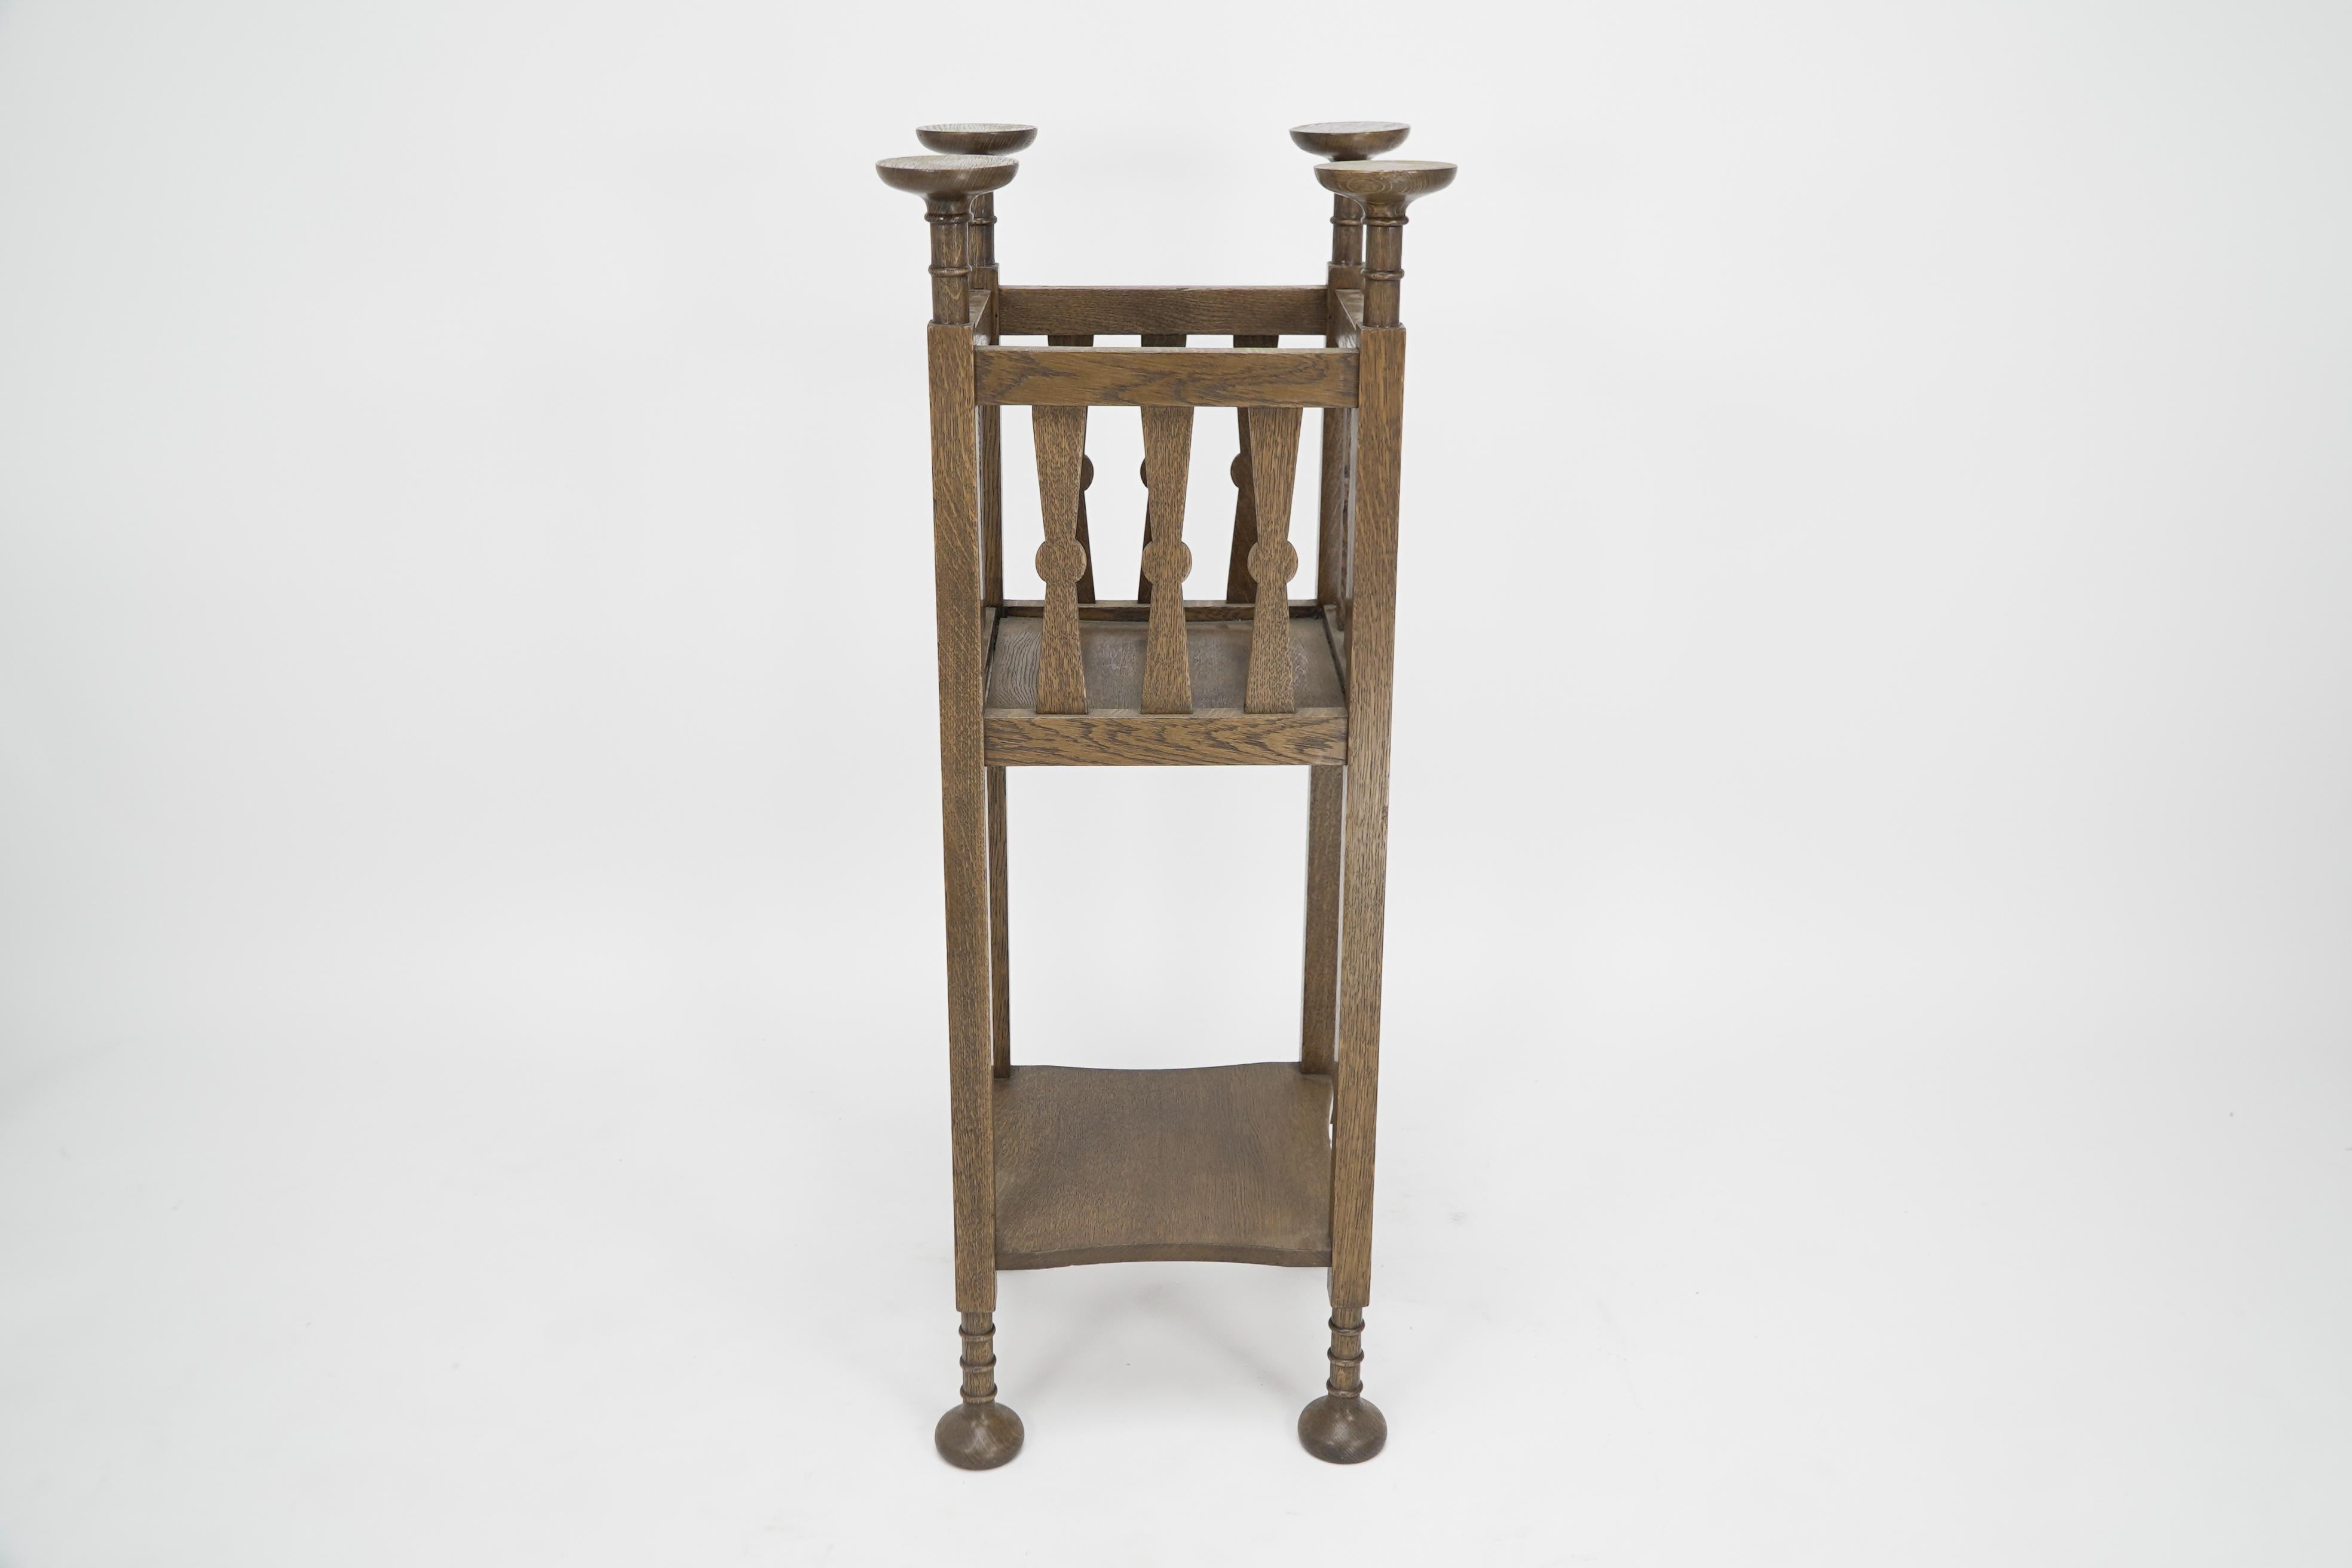 Shapland & Petter. An Arts & Crafts oak plantstand with Voysey style discs finials, and lollipop style uprights to the upper section, on square legs united by a lower shelf. with turned Thebes-style feet.
